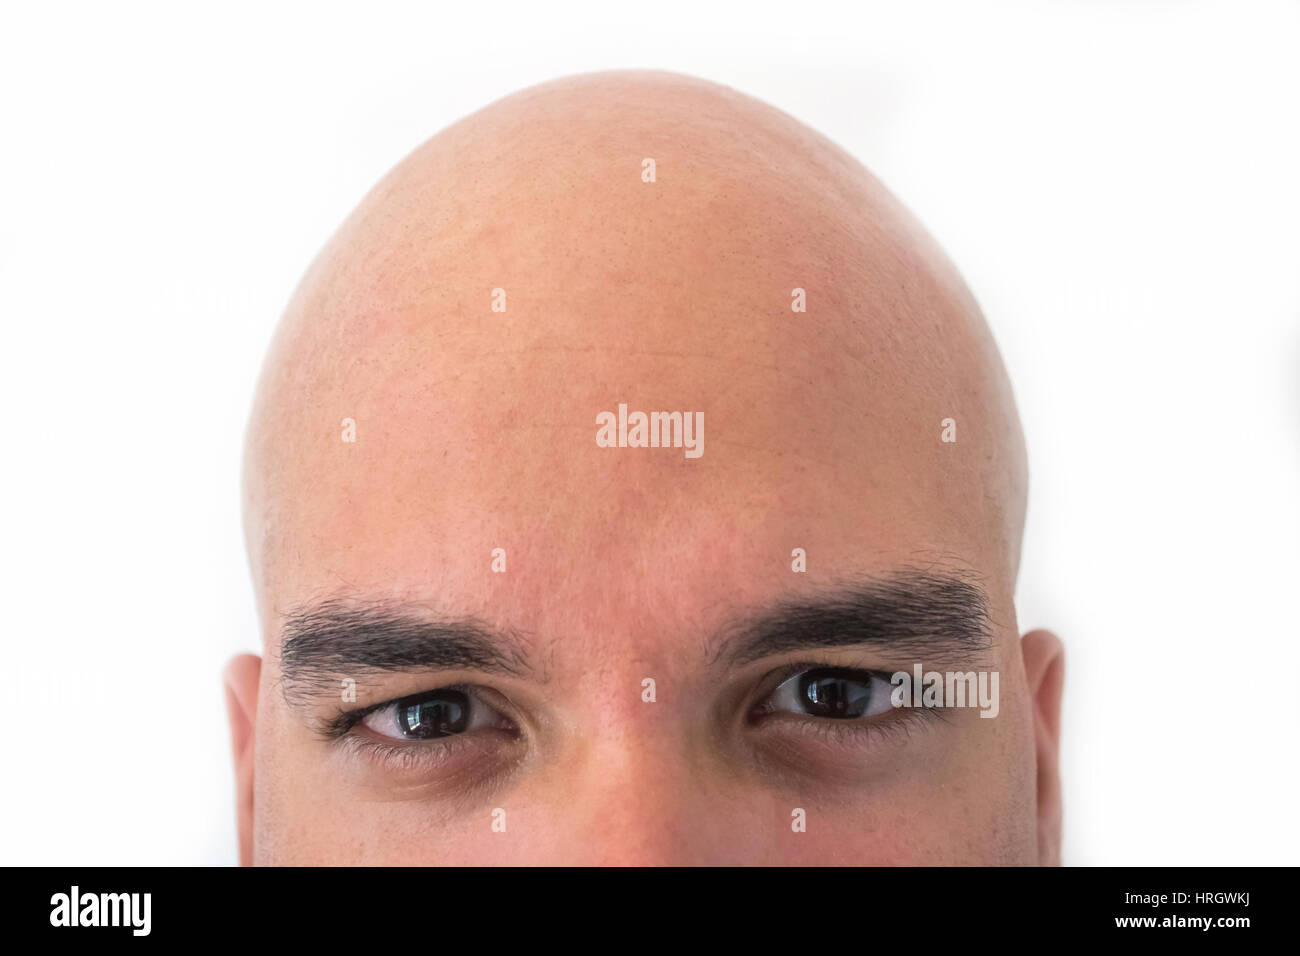 Half face of bald man in white background. Closeup of the eyes. Stock Photo